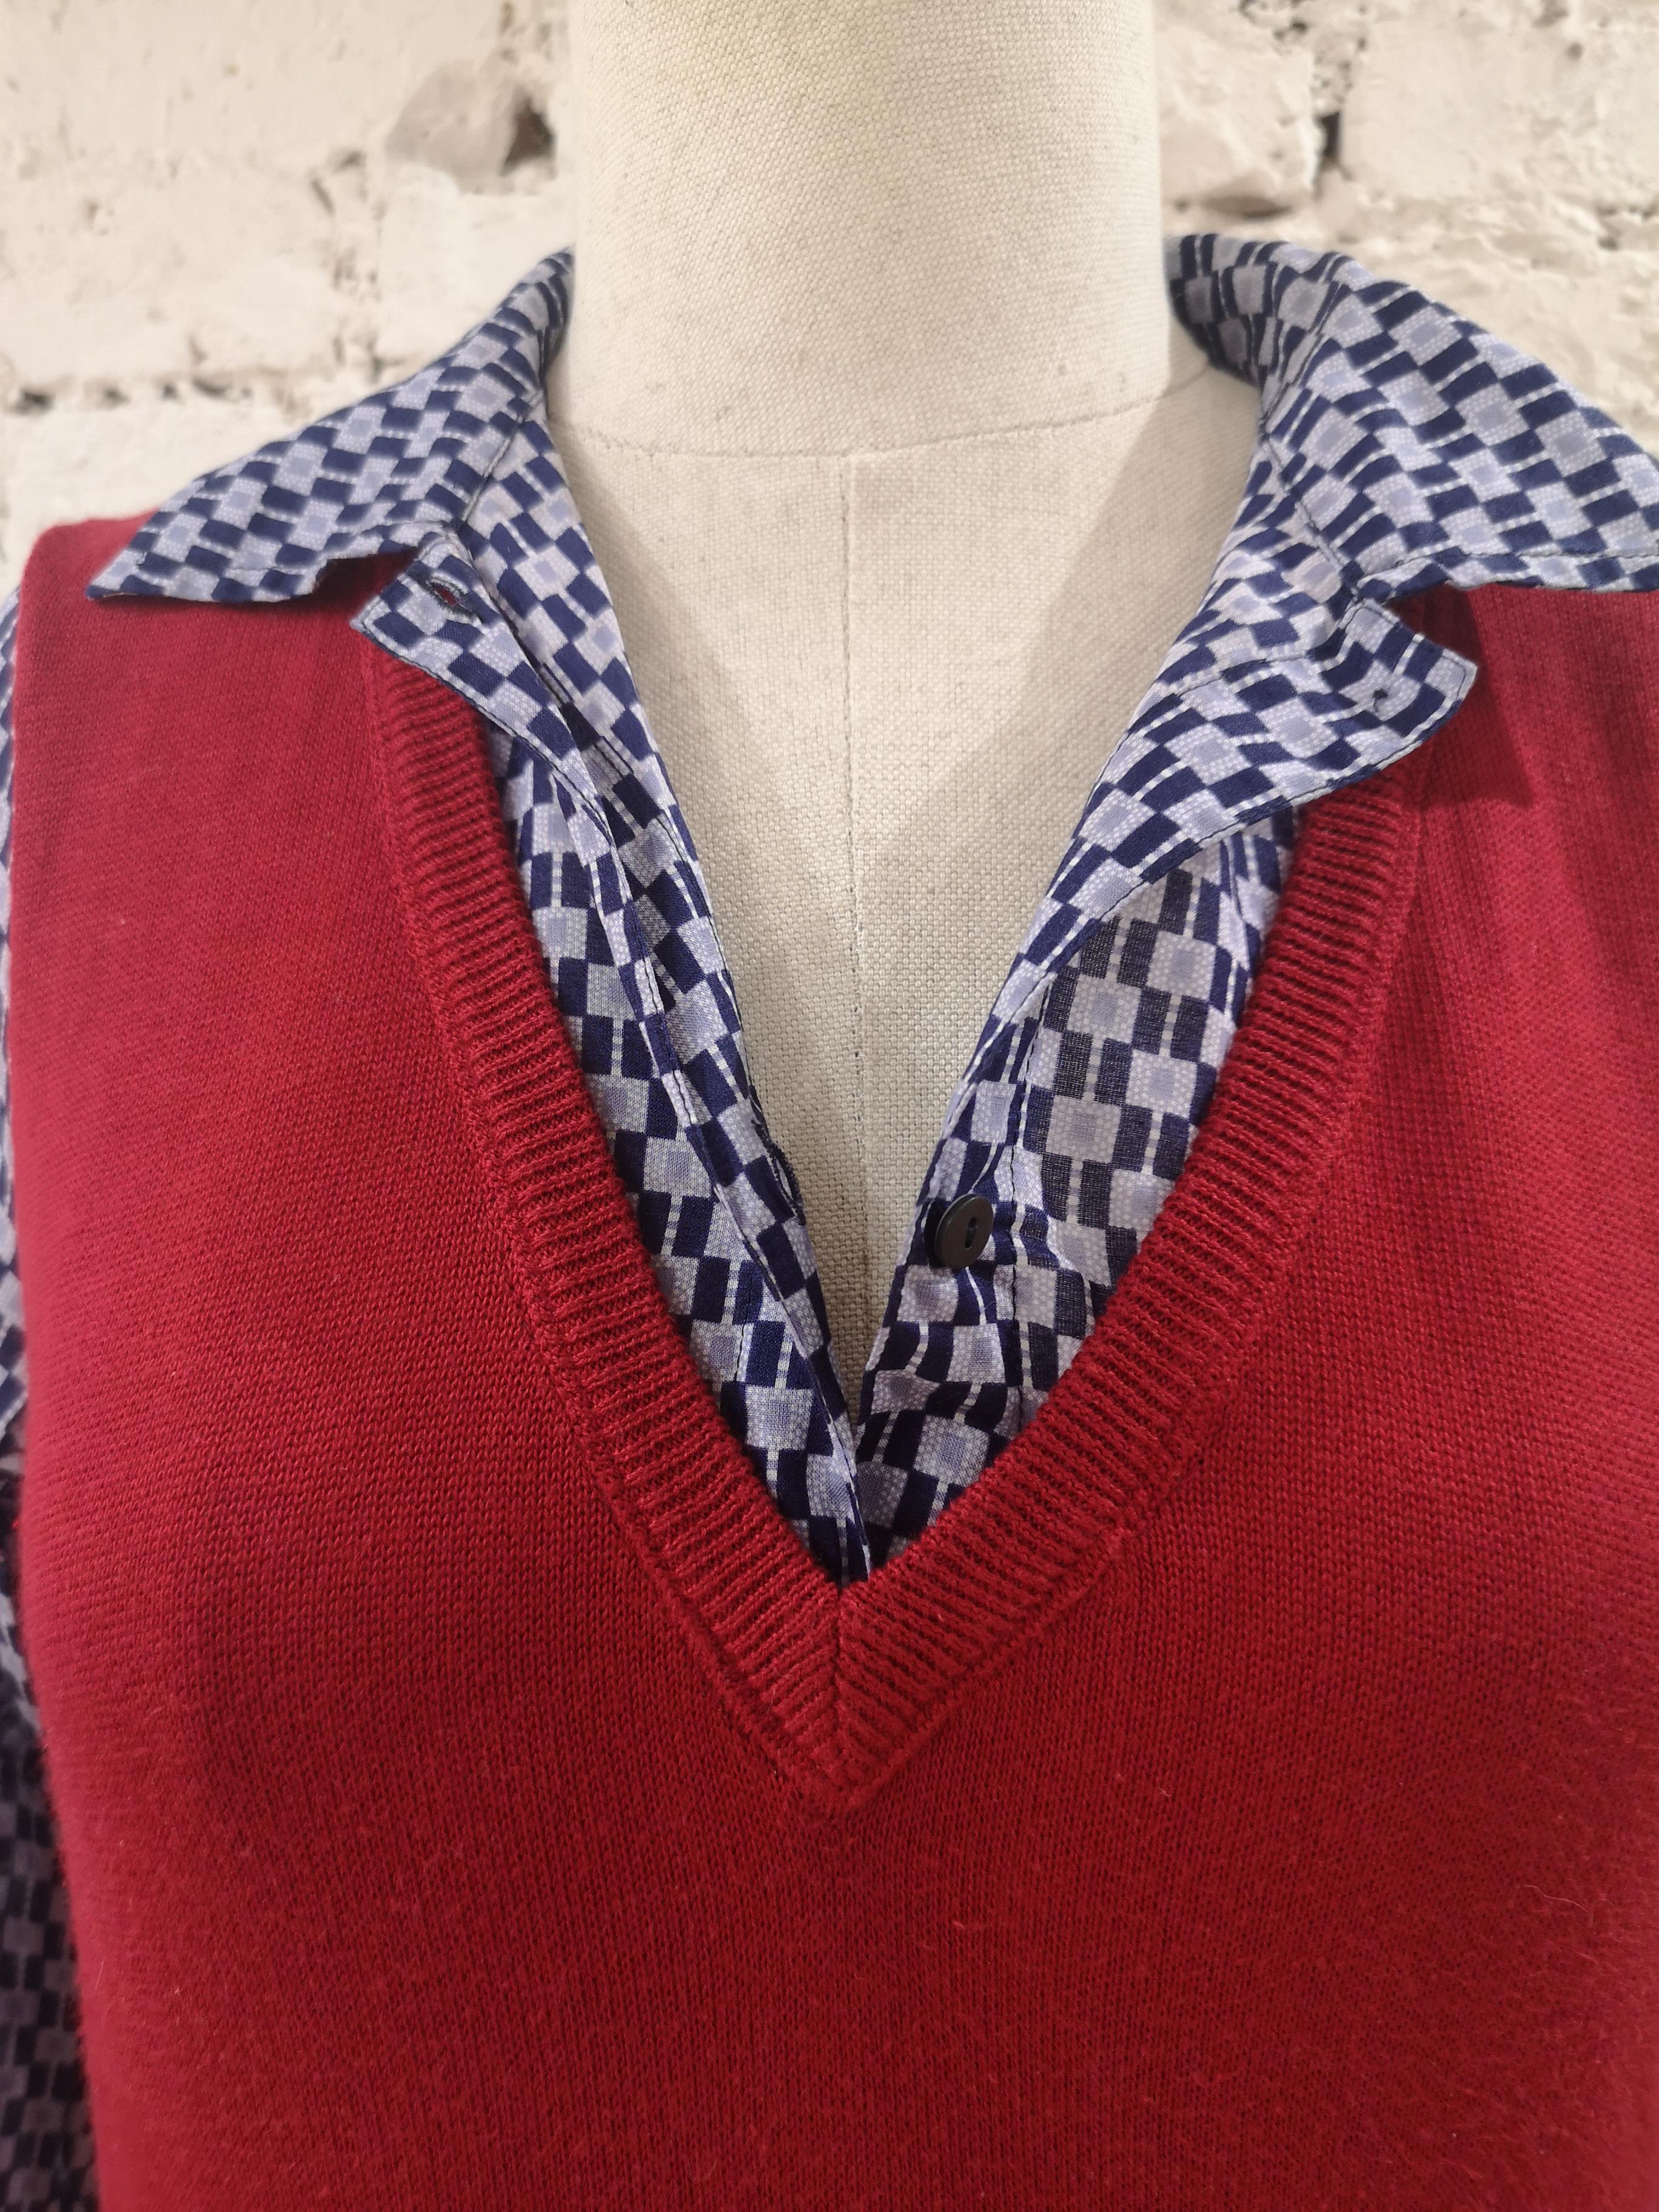 Miu Miu red and blue shirt - sweater In Excellent Condition For Sale In Capri, IT